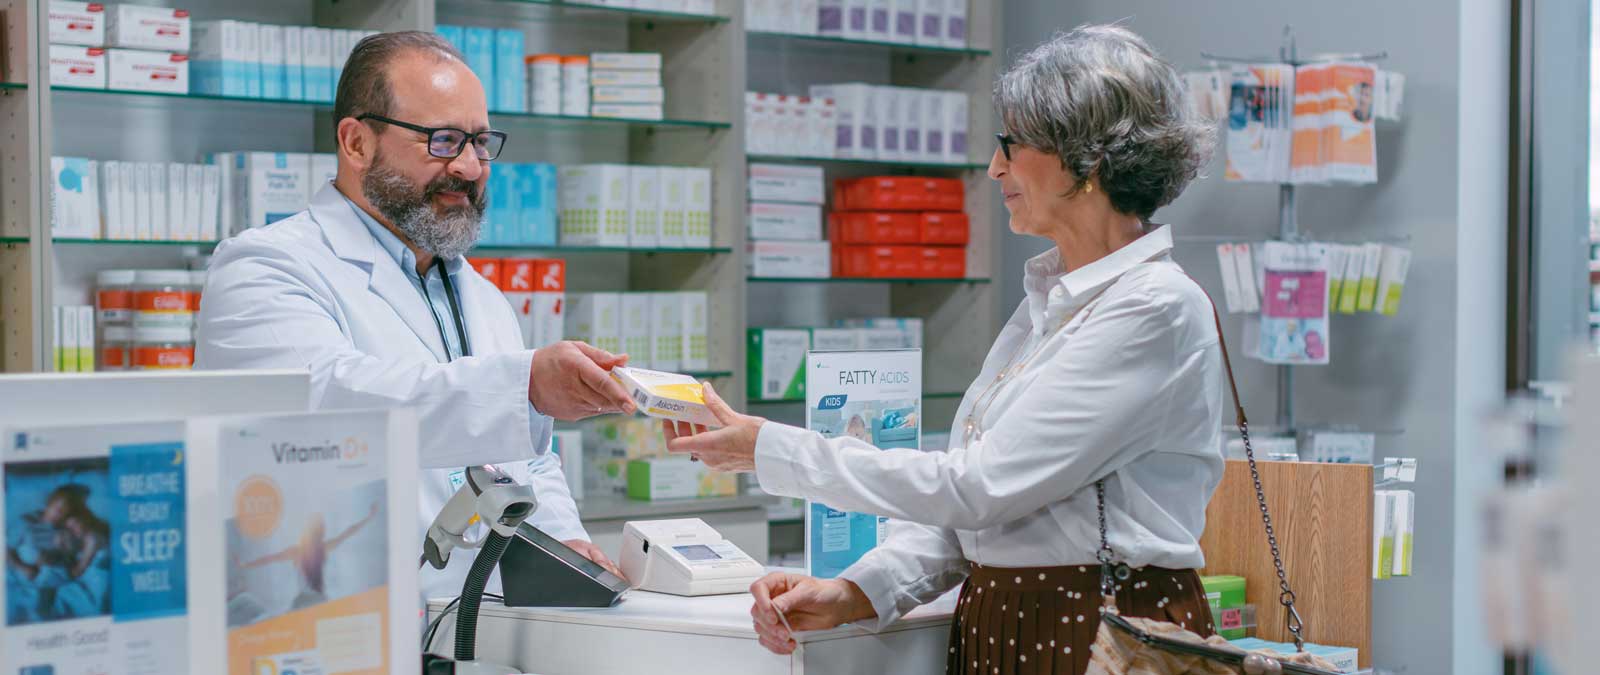 Pharmacist handing a box of medication to a woman at a pharmacy counter.